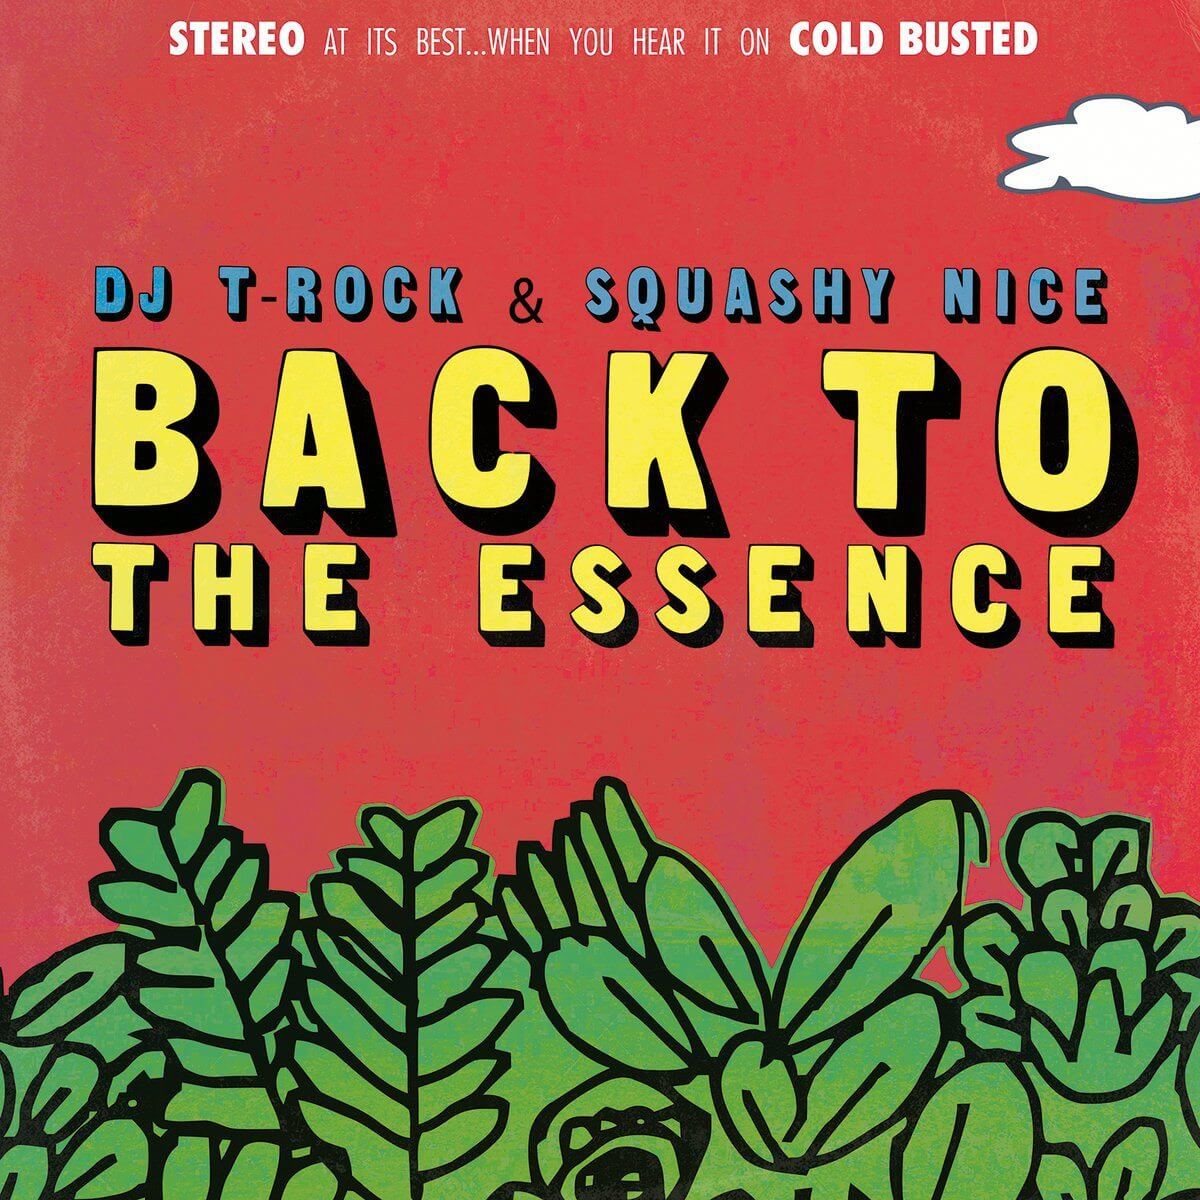 DJ T-Rock & Squashy Nice - Back To The Essence - Limited Edition 12 Inch Vinyl - Cold Busted